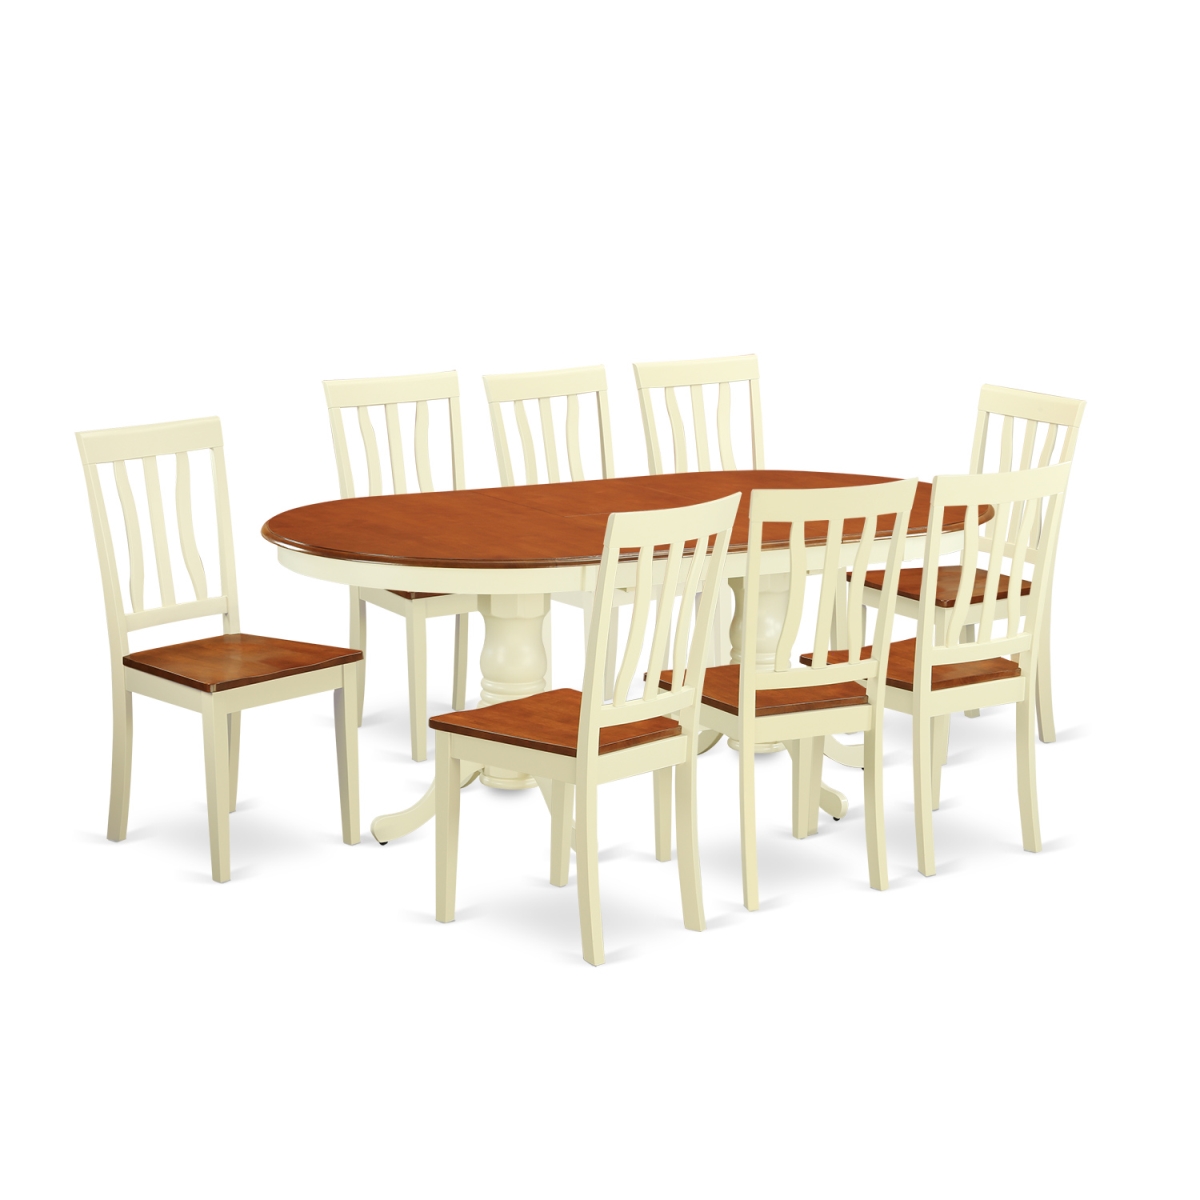 PLAN9-WHI-W Dinette Set - Dining Room Table & 8 Chairs, Buttermilk & Cherry - 9 Piece -  East West Furniture